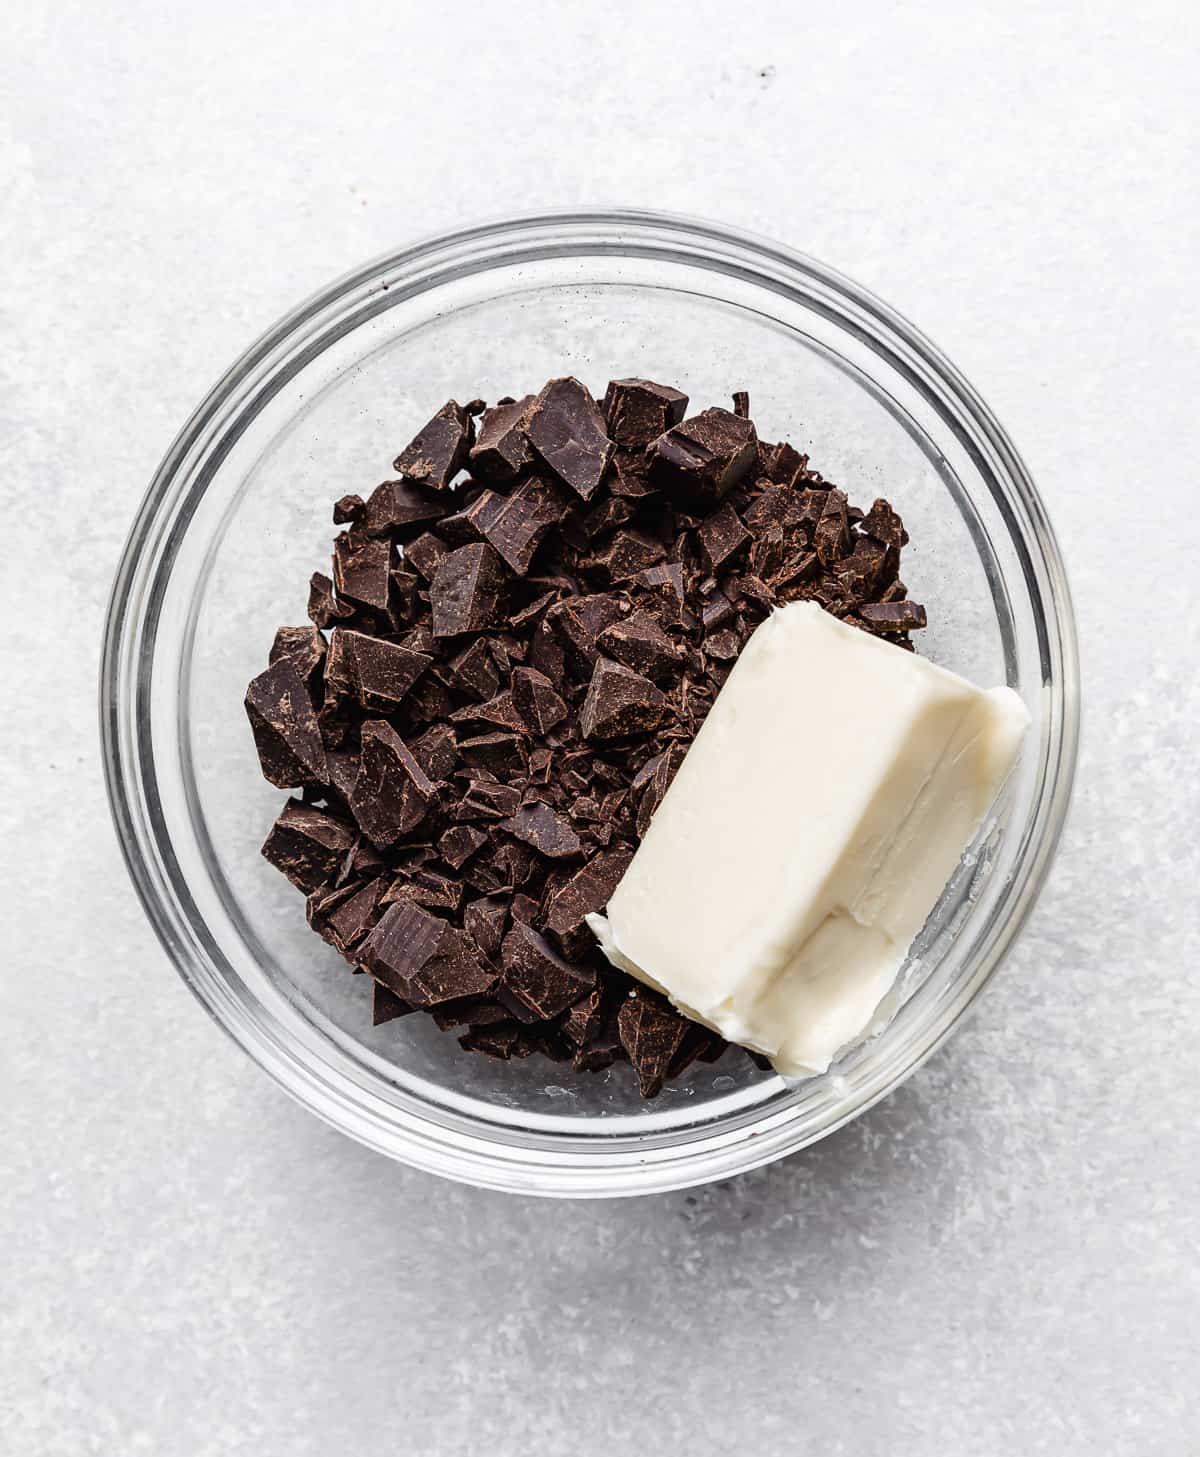 A stick of butter and chopped chocolate in a glass bowl on a light gray background.